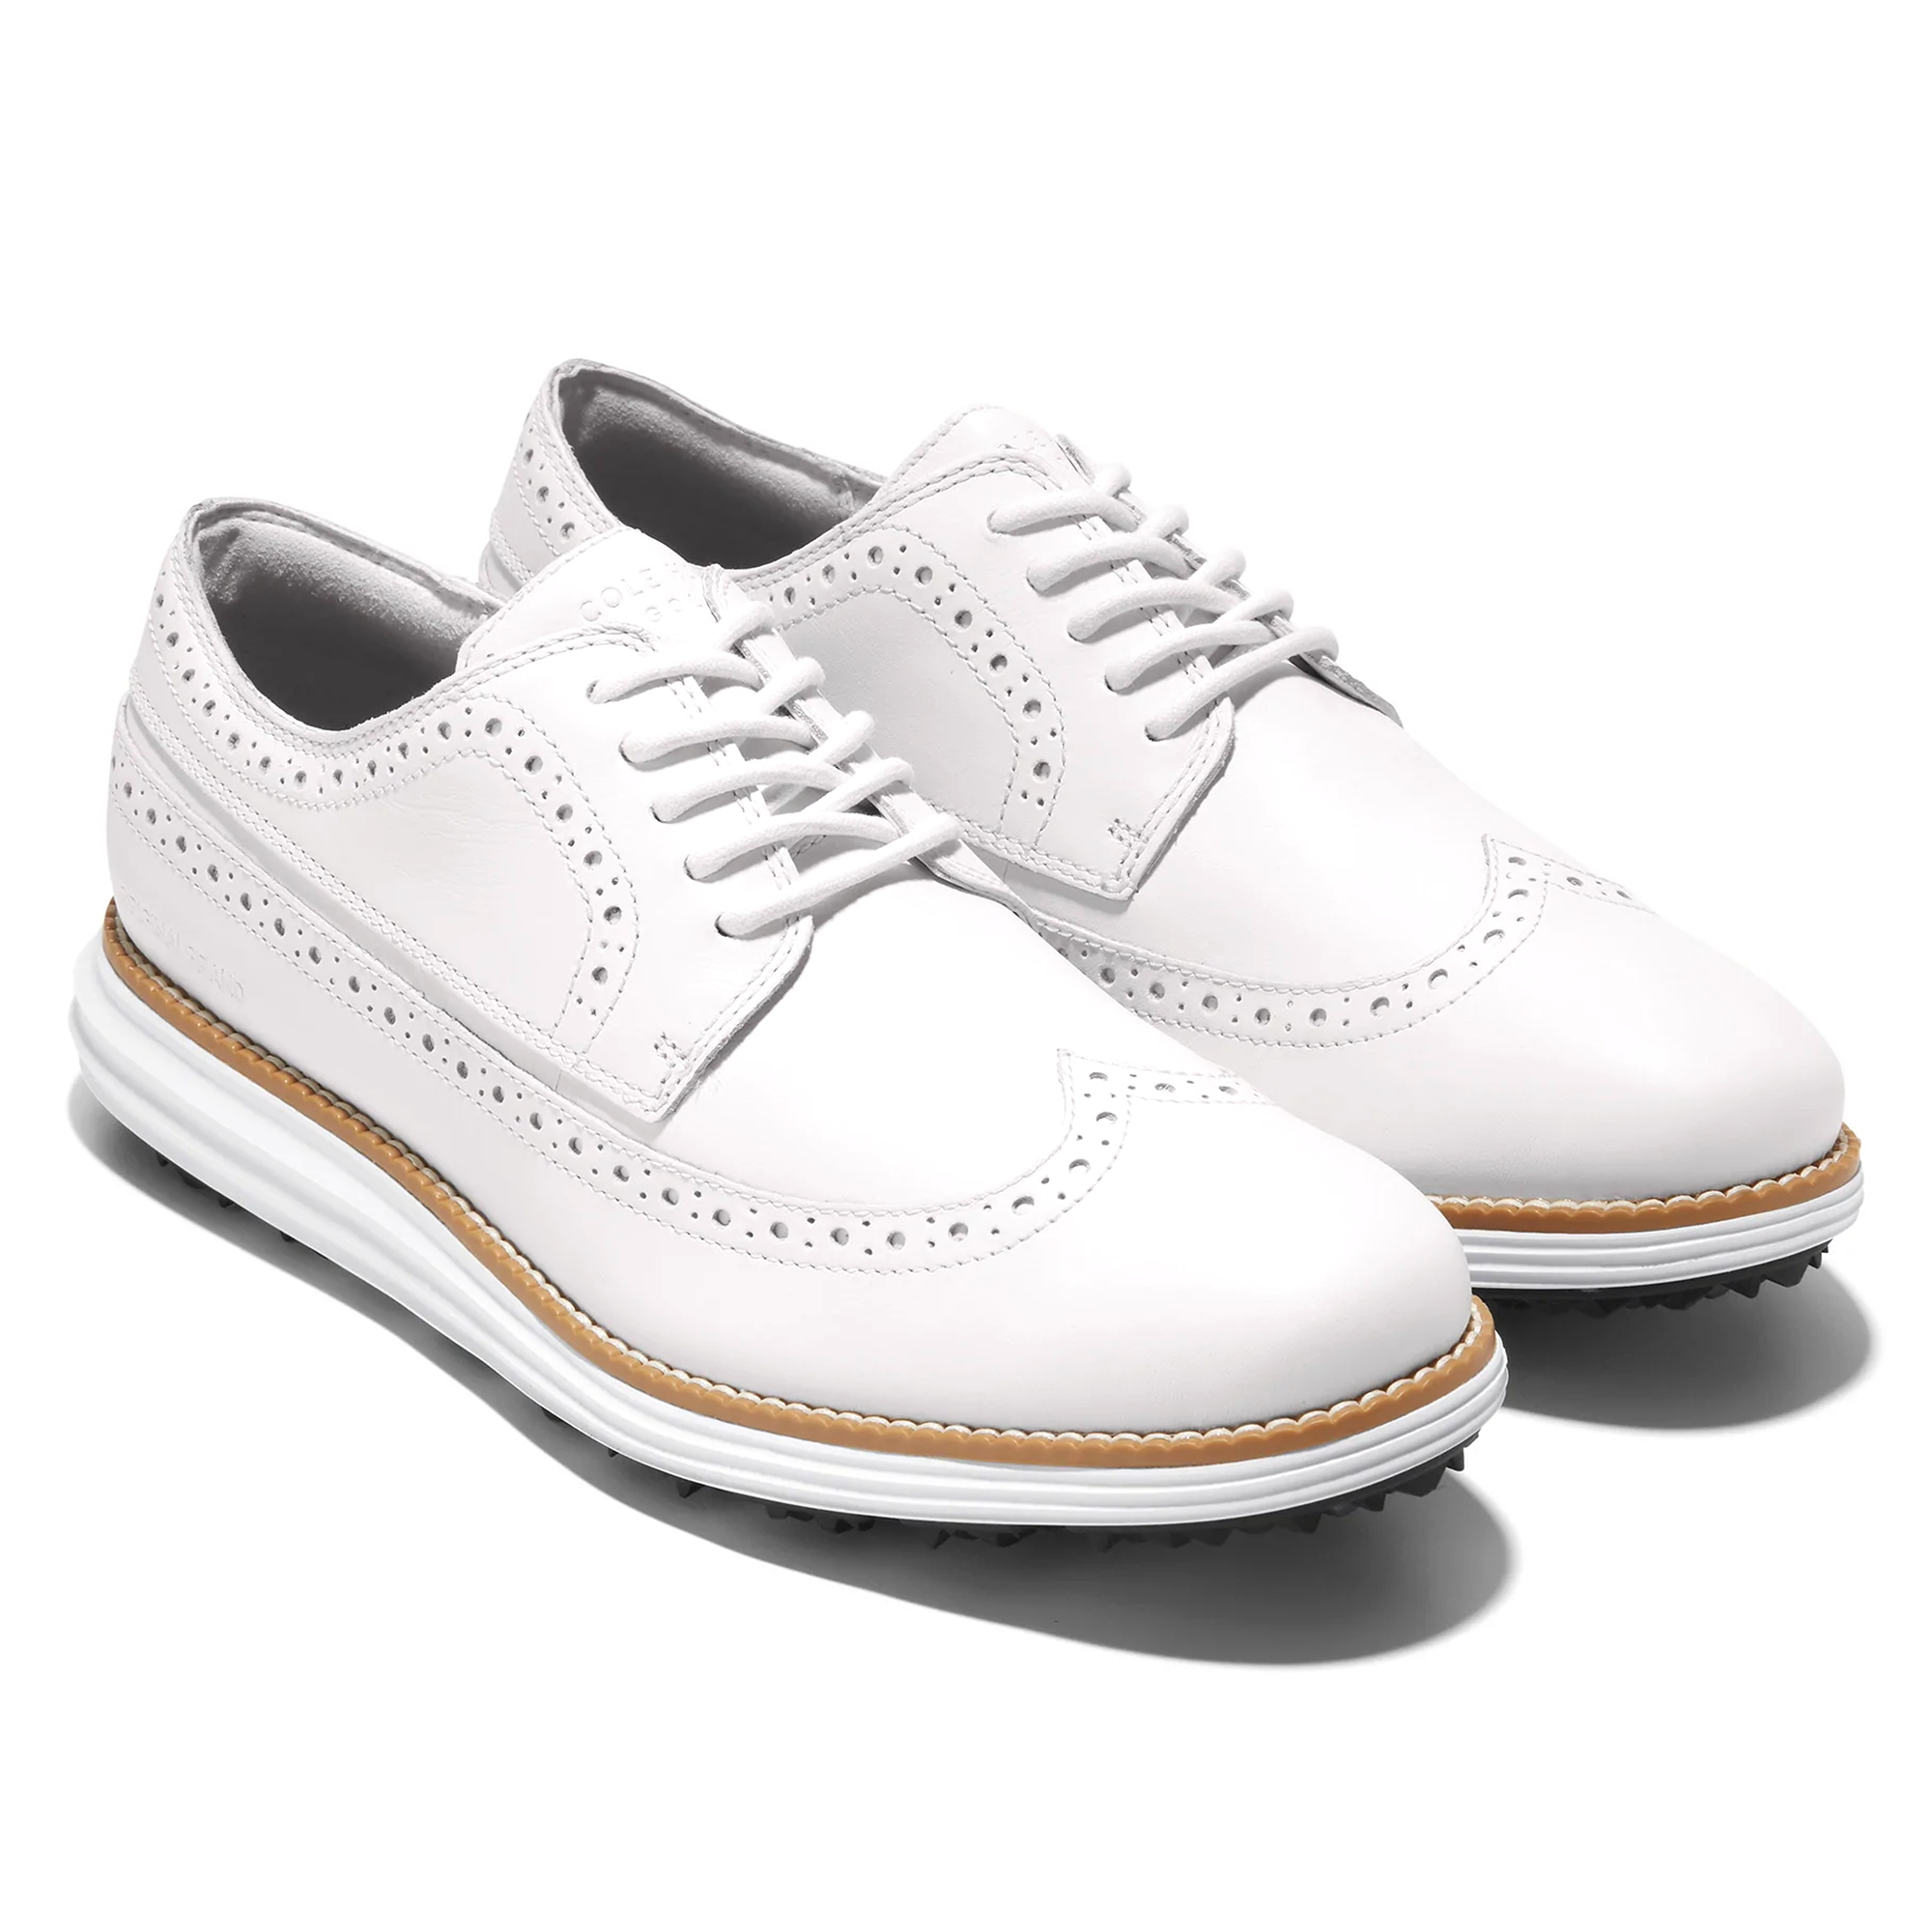 cole-haan-originalgrand-wing-ox-golf-shoes-c37230-optic-white-natural